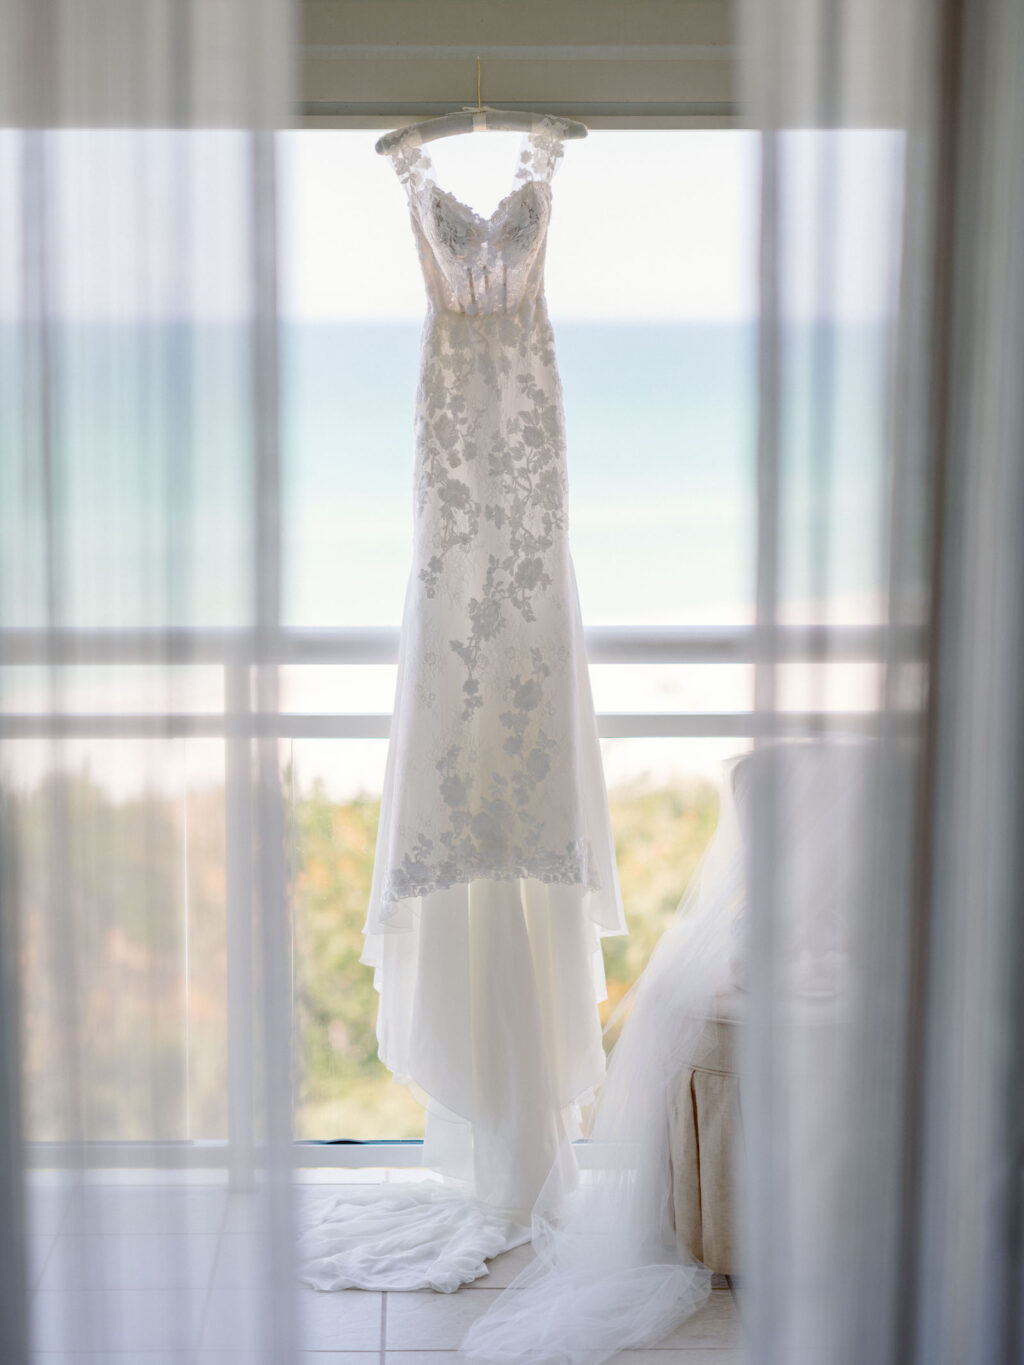 Luxurious Provinias Wedding Dress with Floral Appliqué Sleeves and Fitted Corset, Hanging From Balcony Overlooking Gulf of Mexico | Florida Wedding Venue The Resort at Longboat Key Club